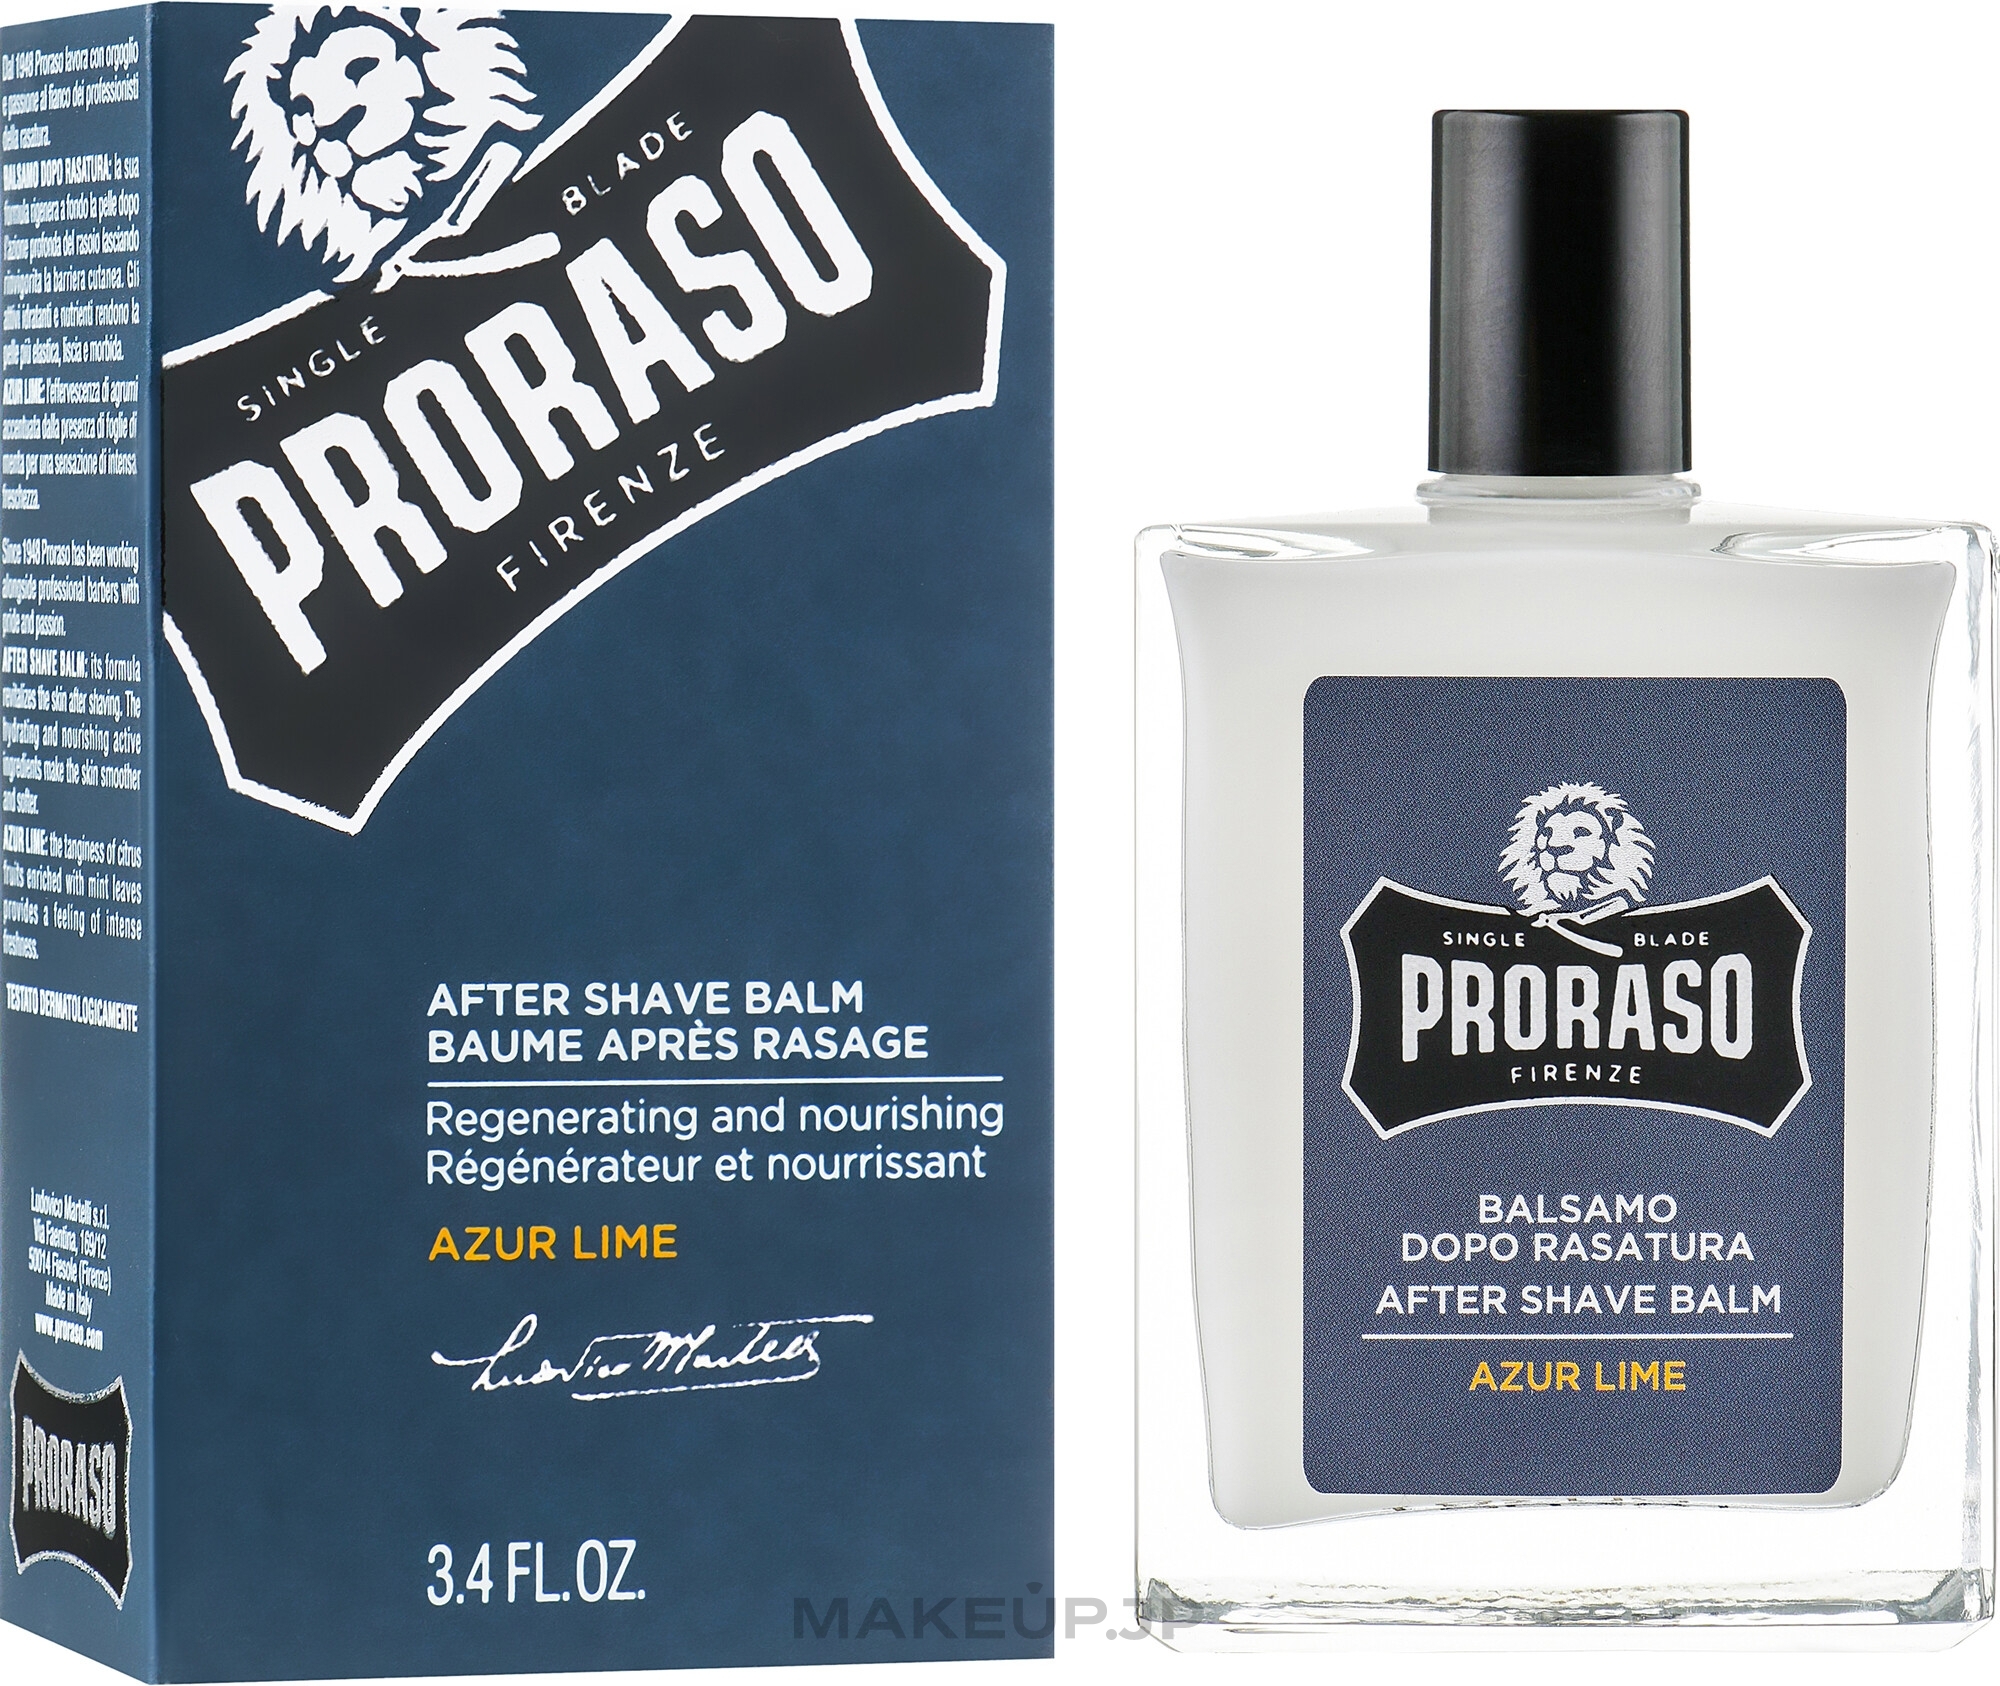 After Shave Balm - Proraso Azur Lime After Shave Balm — photo 100 ml